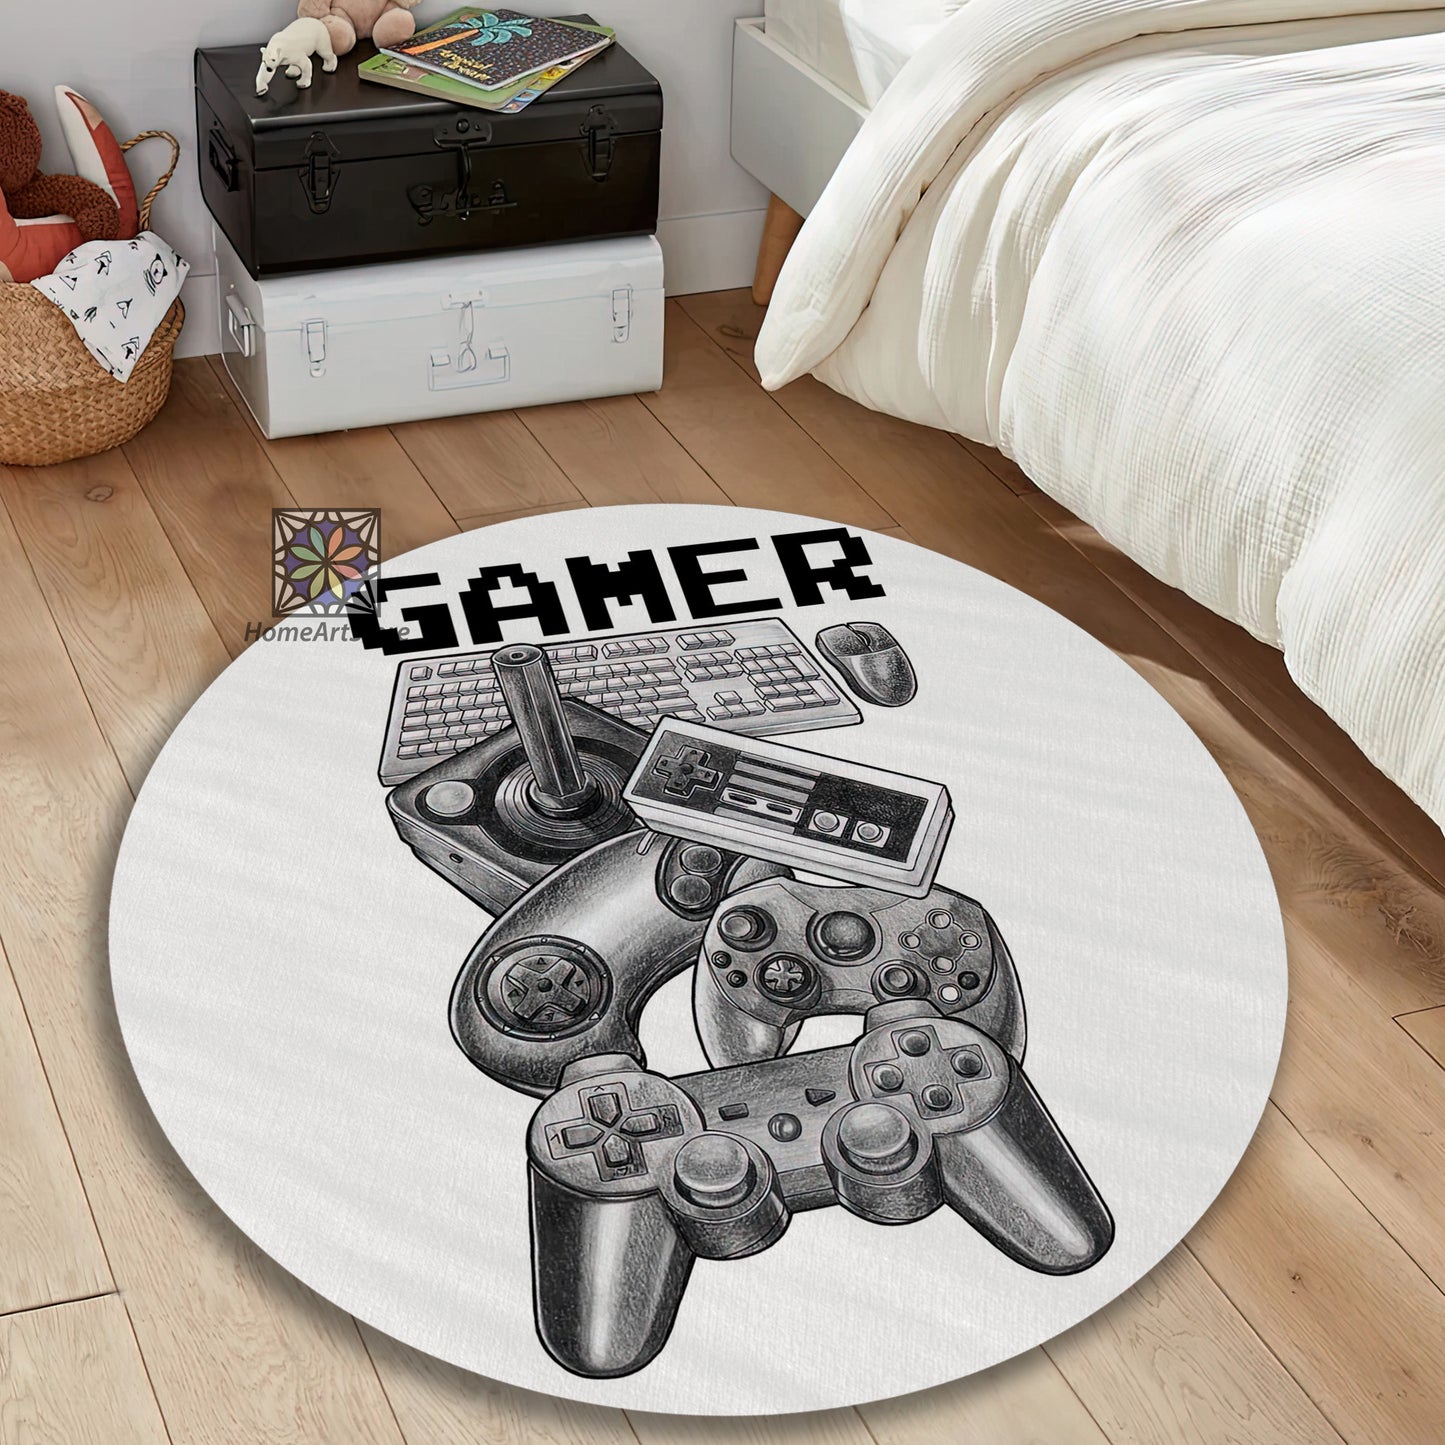 Pencil Drawing Game Controller Rug, Gamer Carpet, Game Room Decor, Gaming Chair Mat, Gift for Gamer